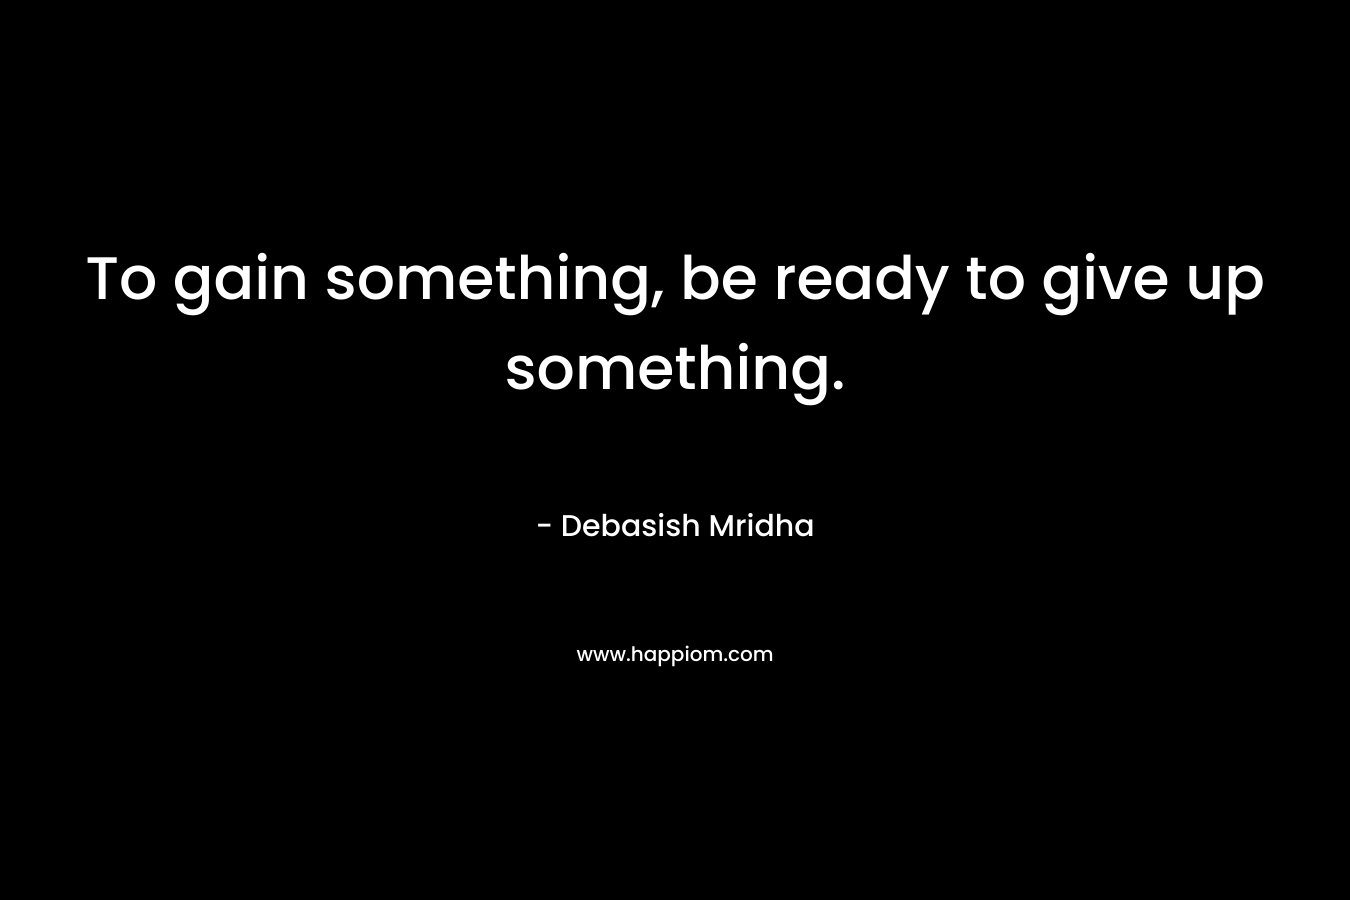 To gain something, be ready to give up something.